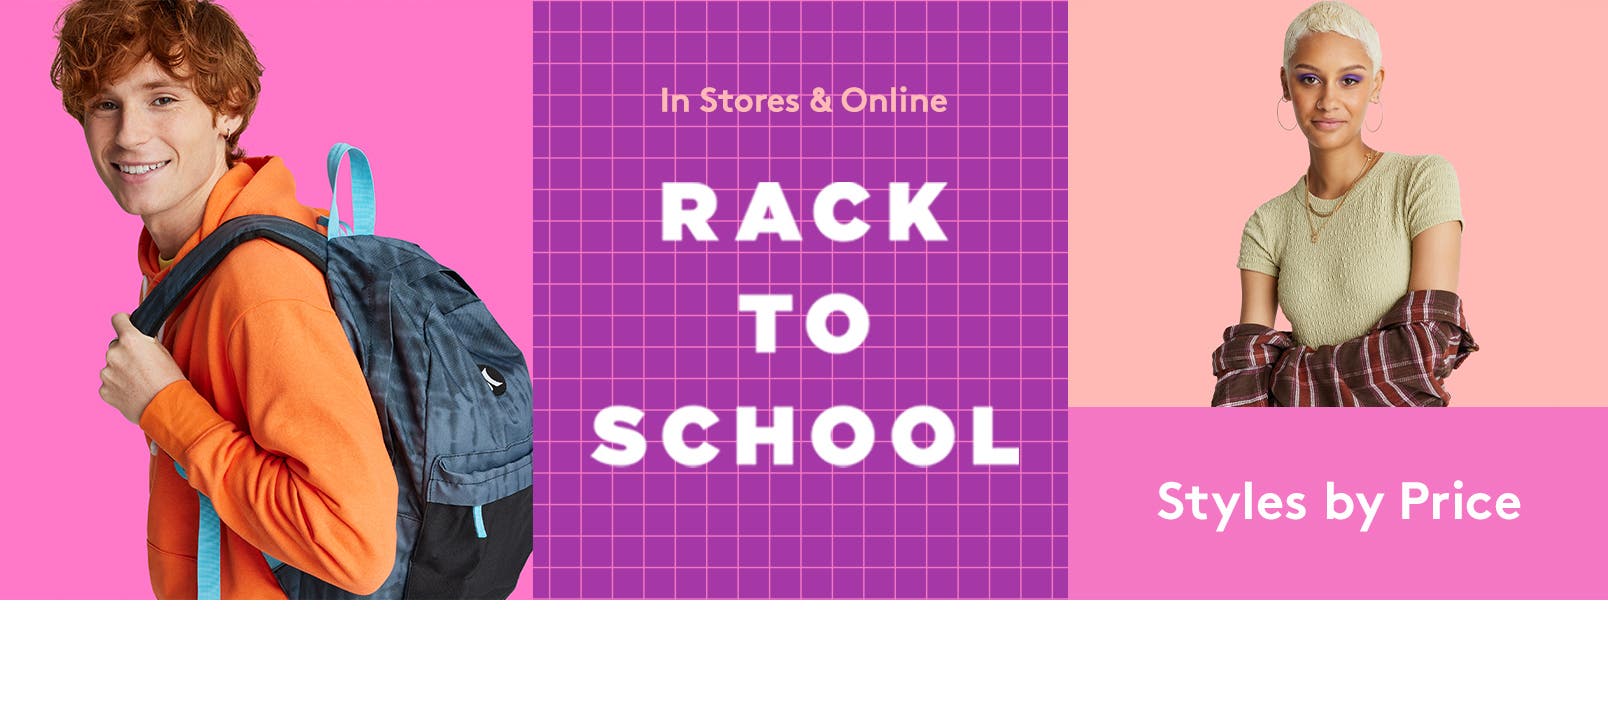 Back to school styles for young adults.